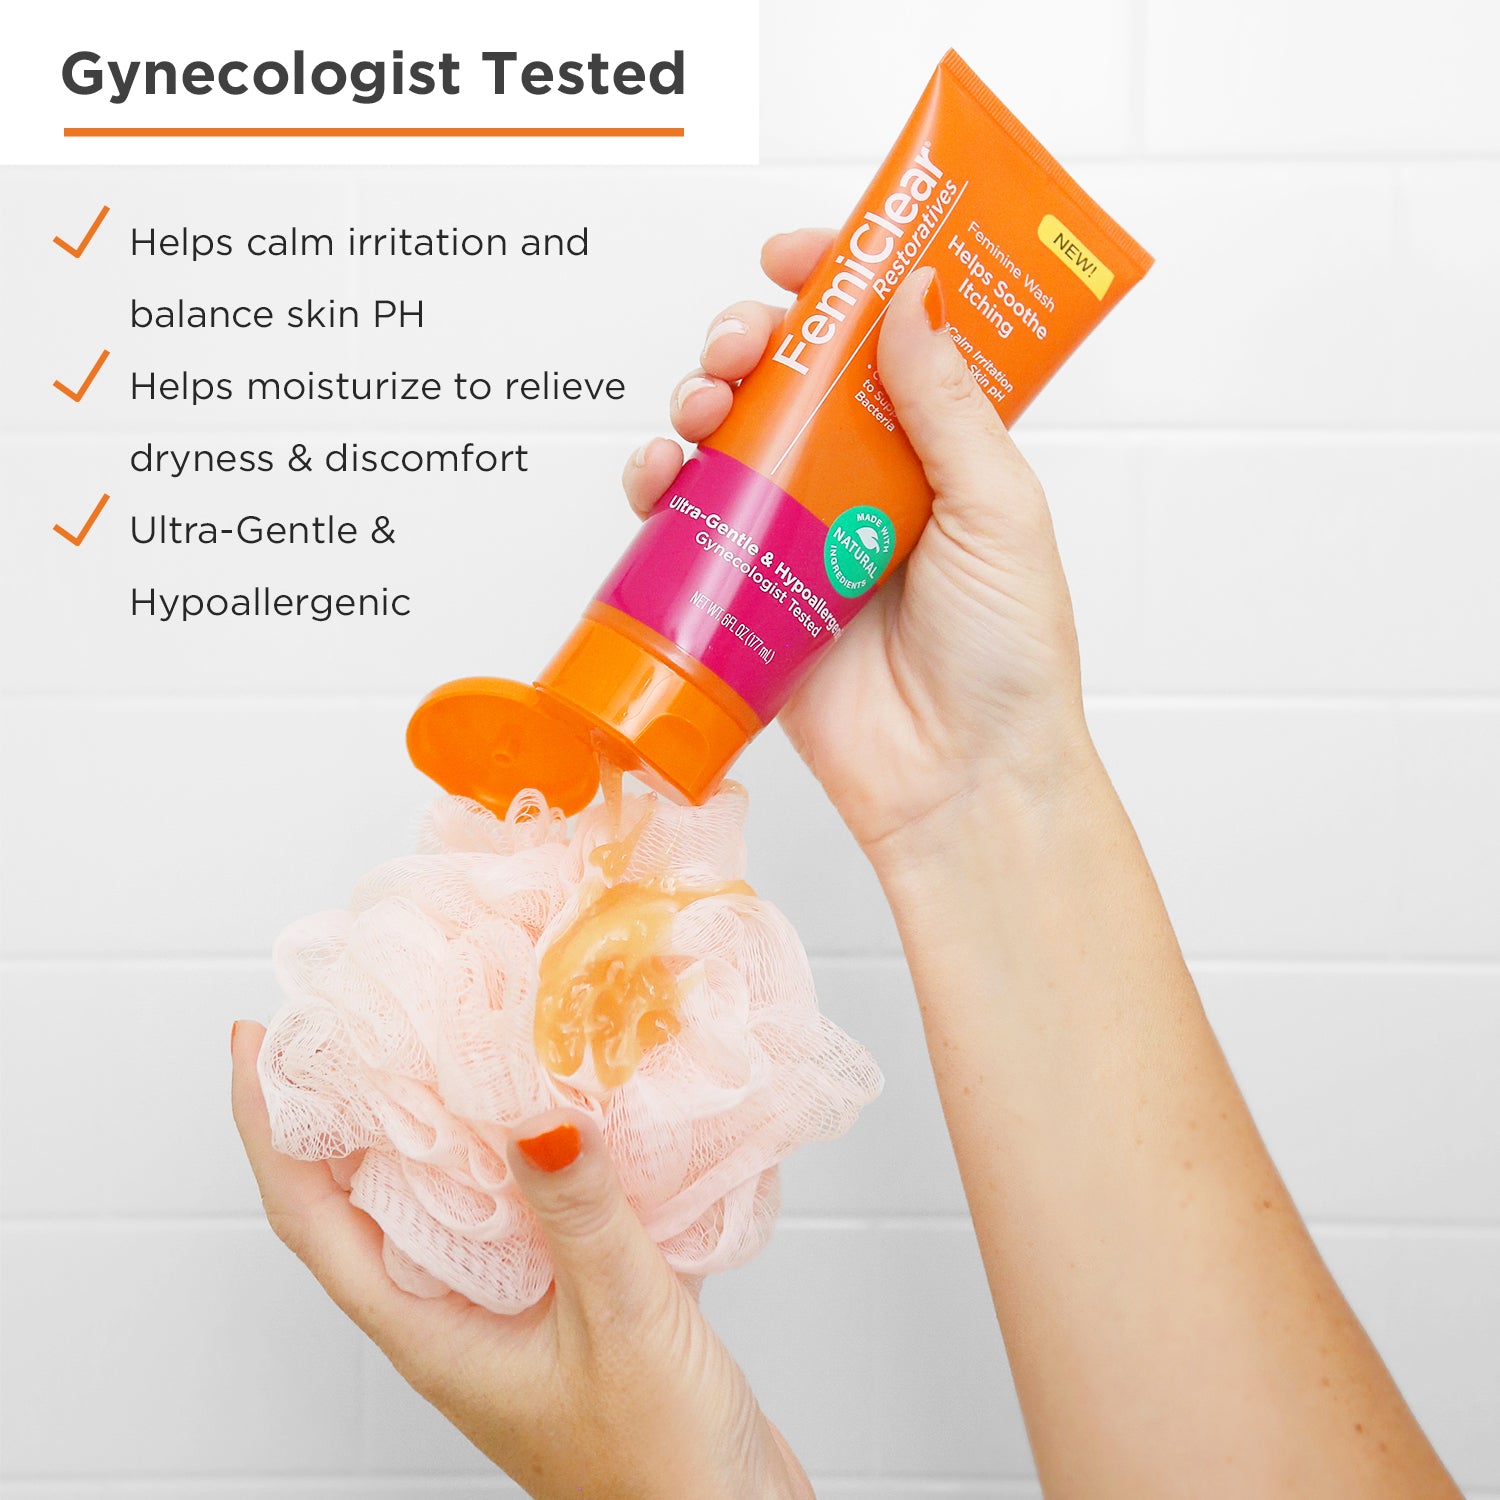 Gynecologist tested vaginal wash. PH balancing vaginal wash that helps with yeast infection symptoms and itching.